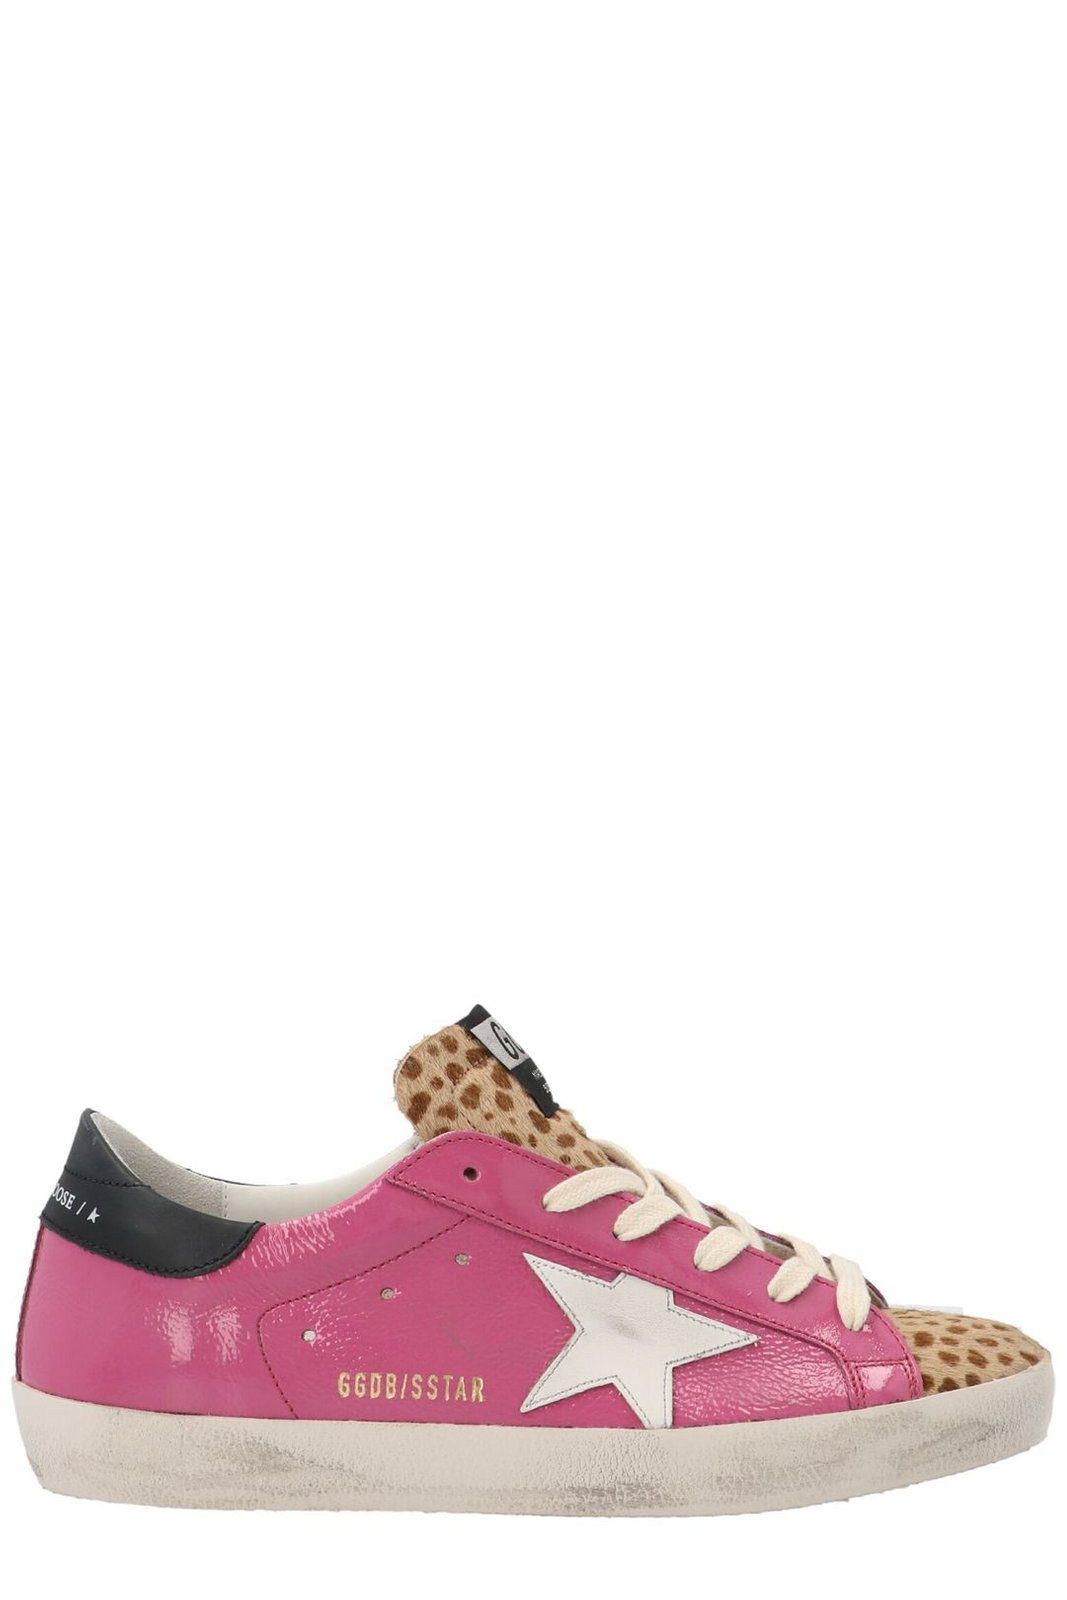 Golden Goose Deluxe Brand Star Patch Sneakers | Cettire Global